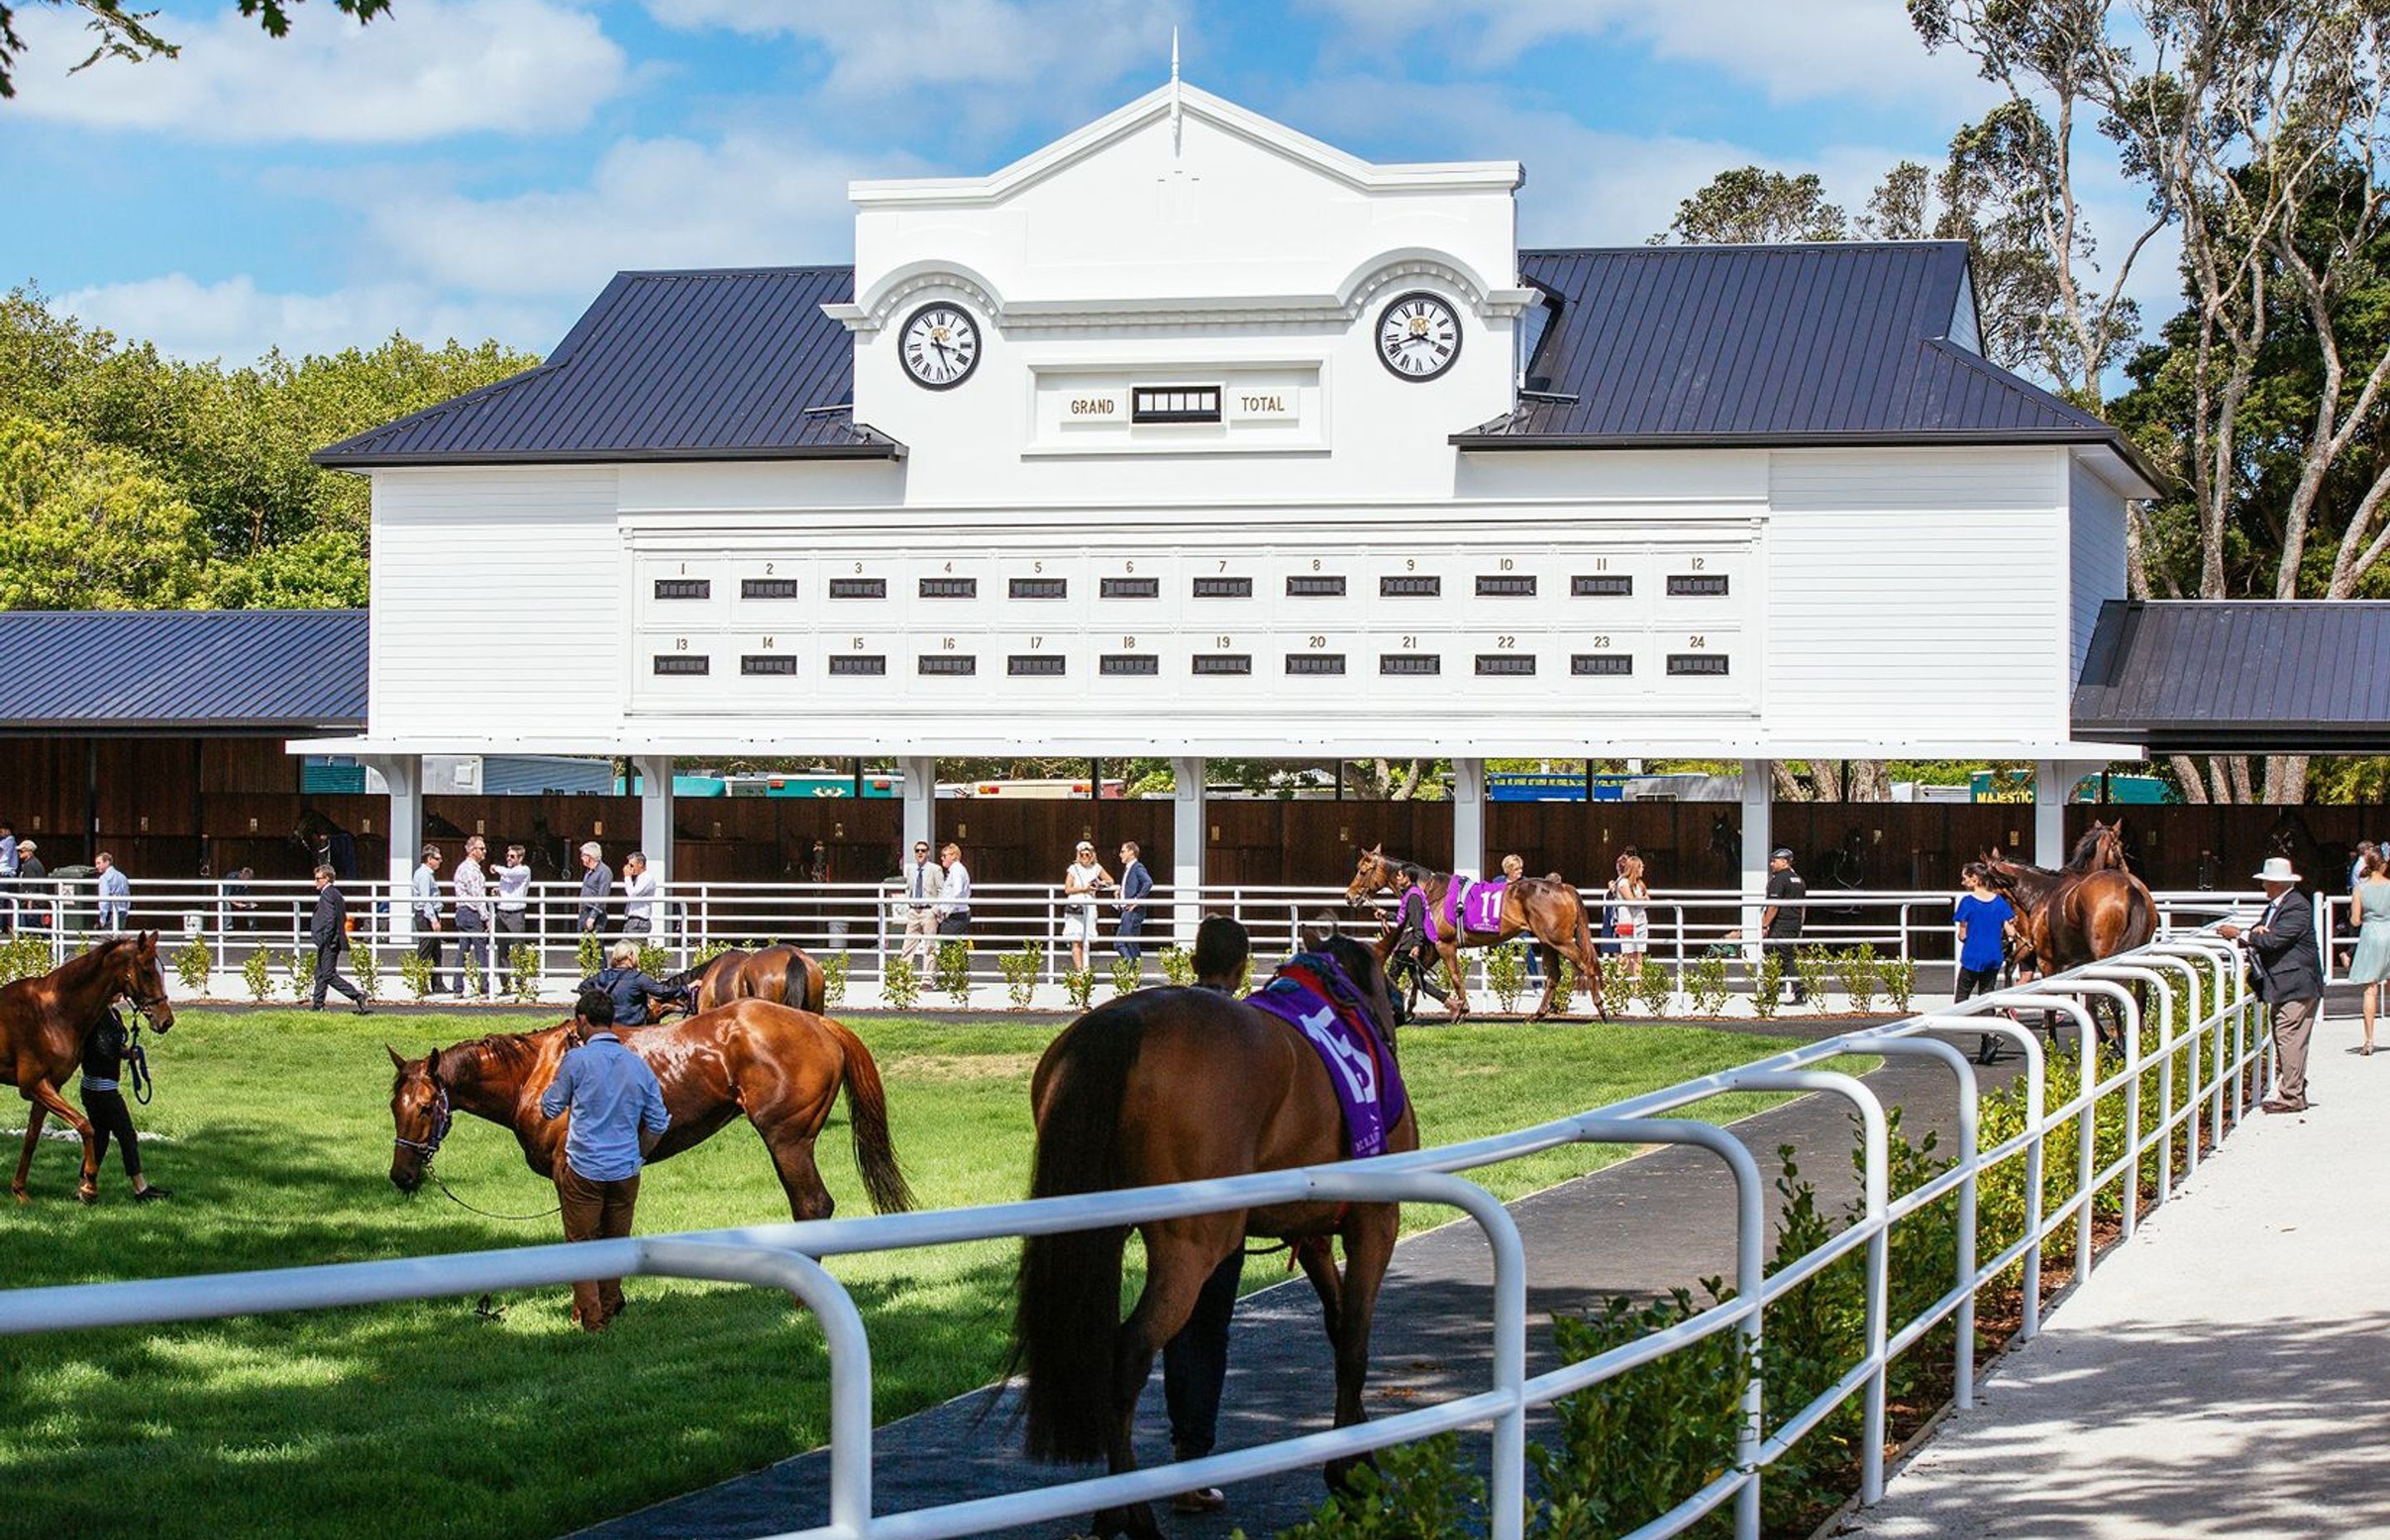 Images courtesy of Auckland Racing Club.